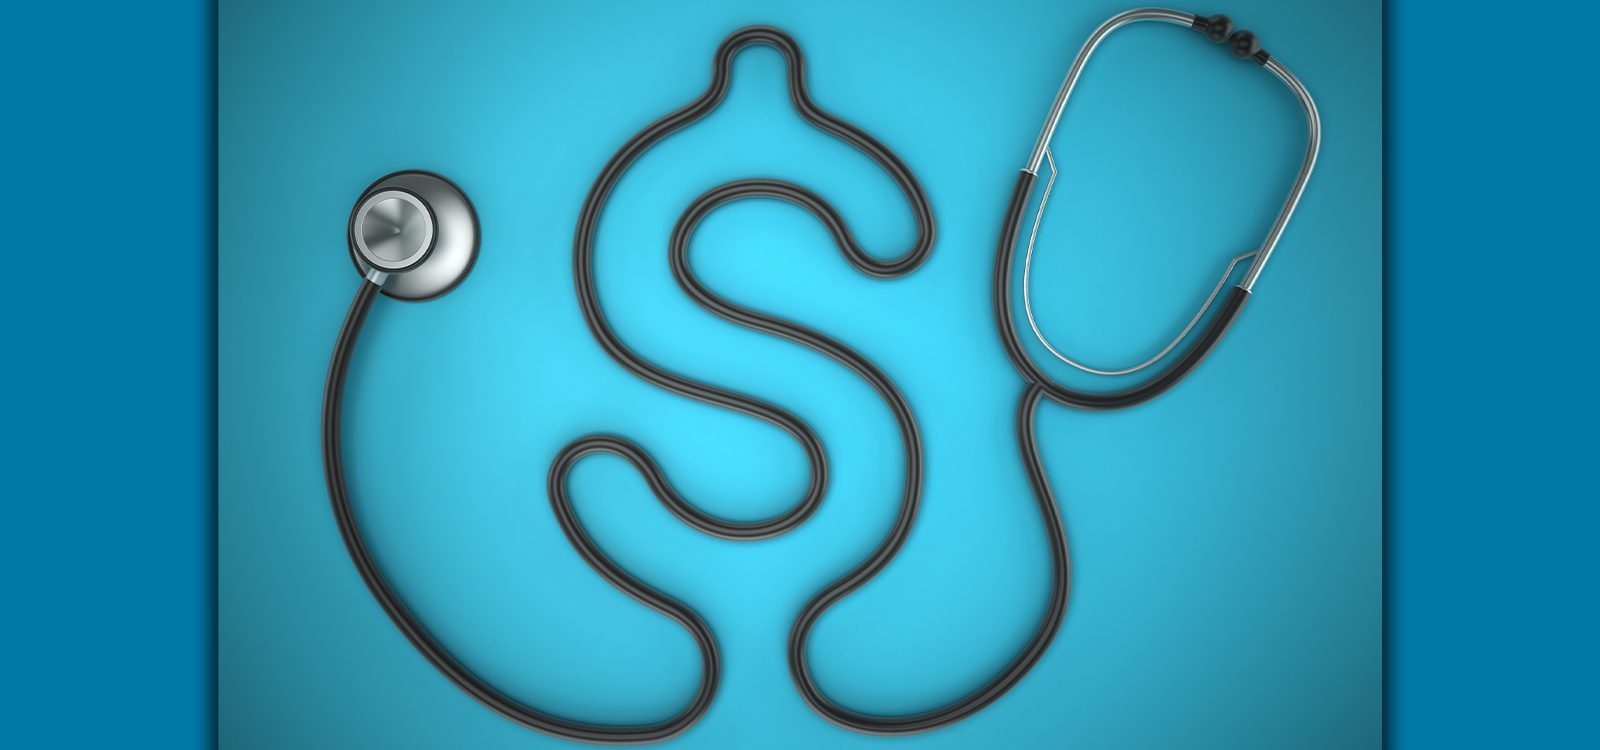 Getting better value from healthcare